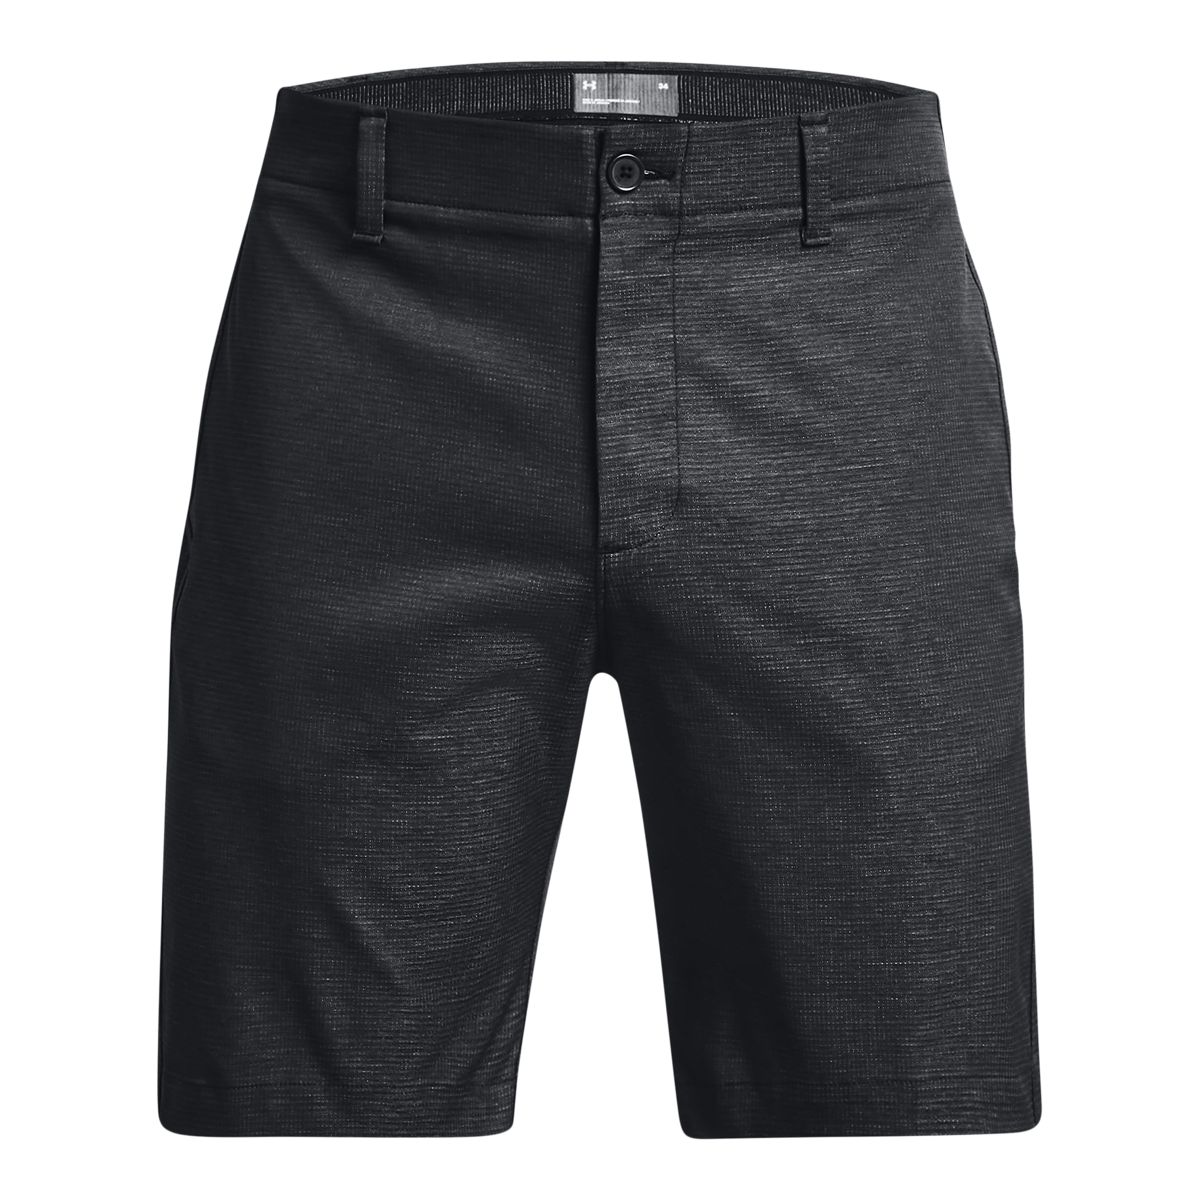 Men's UA Iso-Chill Perforated Short Sleeve